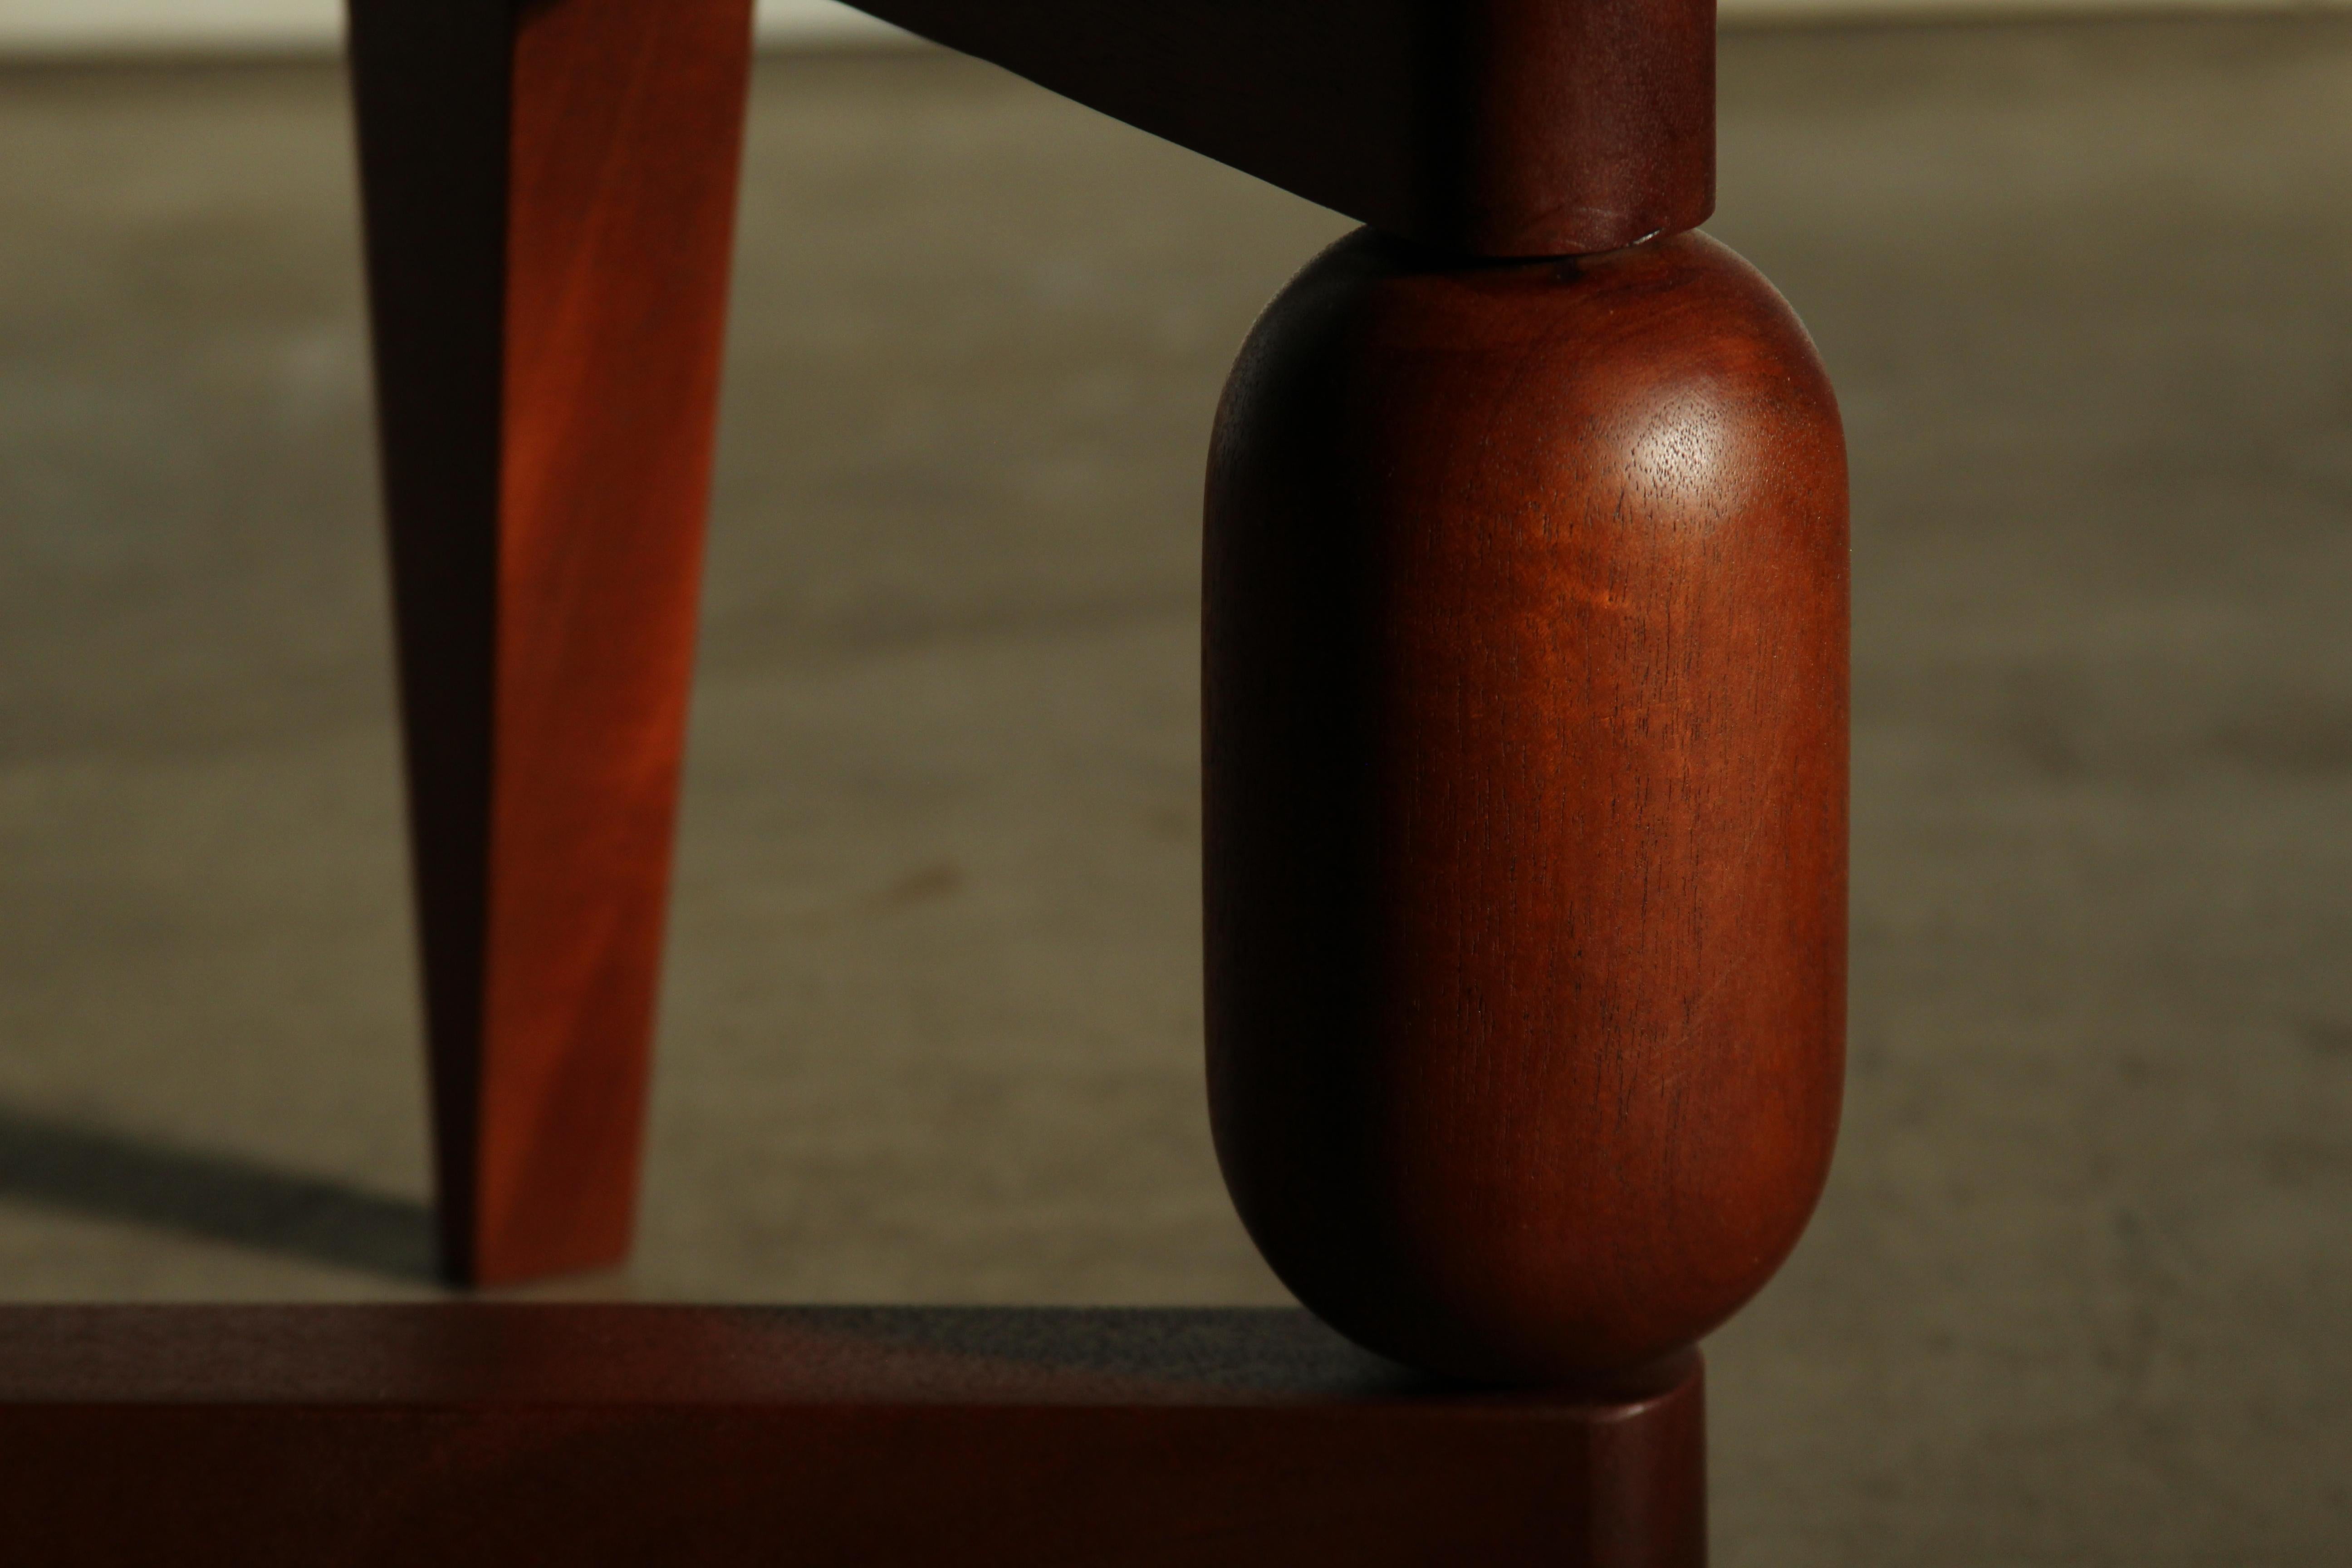 Mahogany Sculptural Freeform Coffee Table in the Manner of Isamu Noguchi, 1970s For Sale